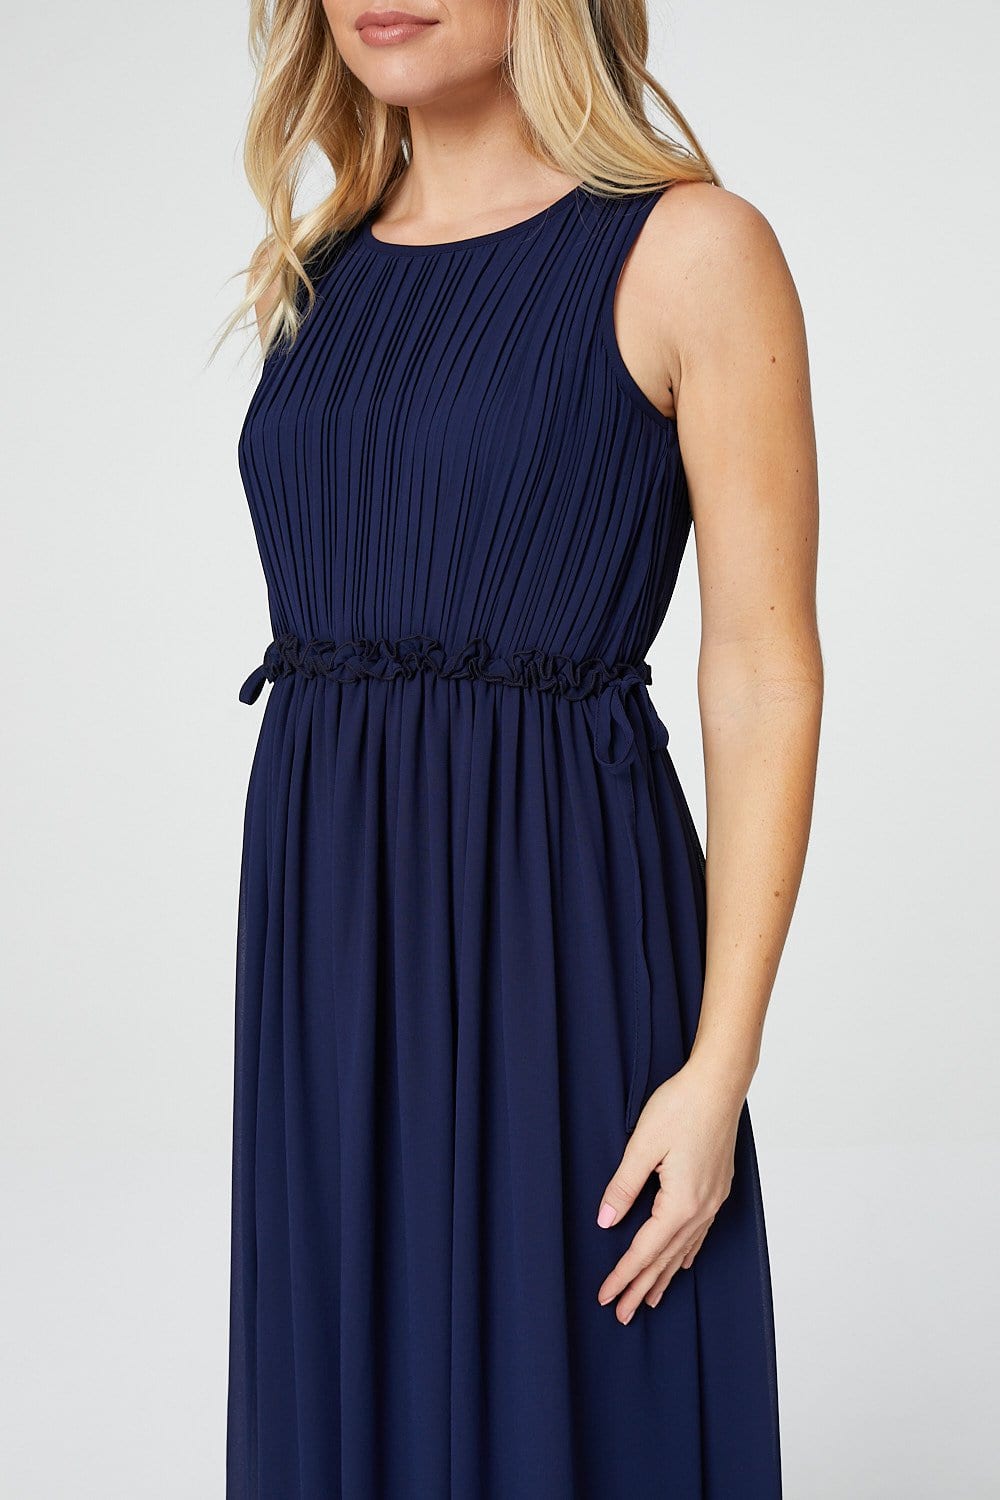 Navy | Ruched Bodice Maxi Dress